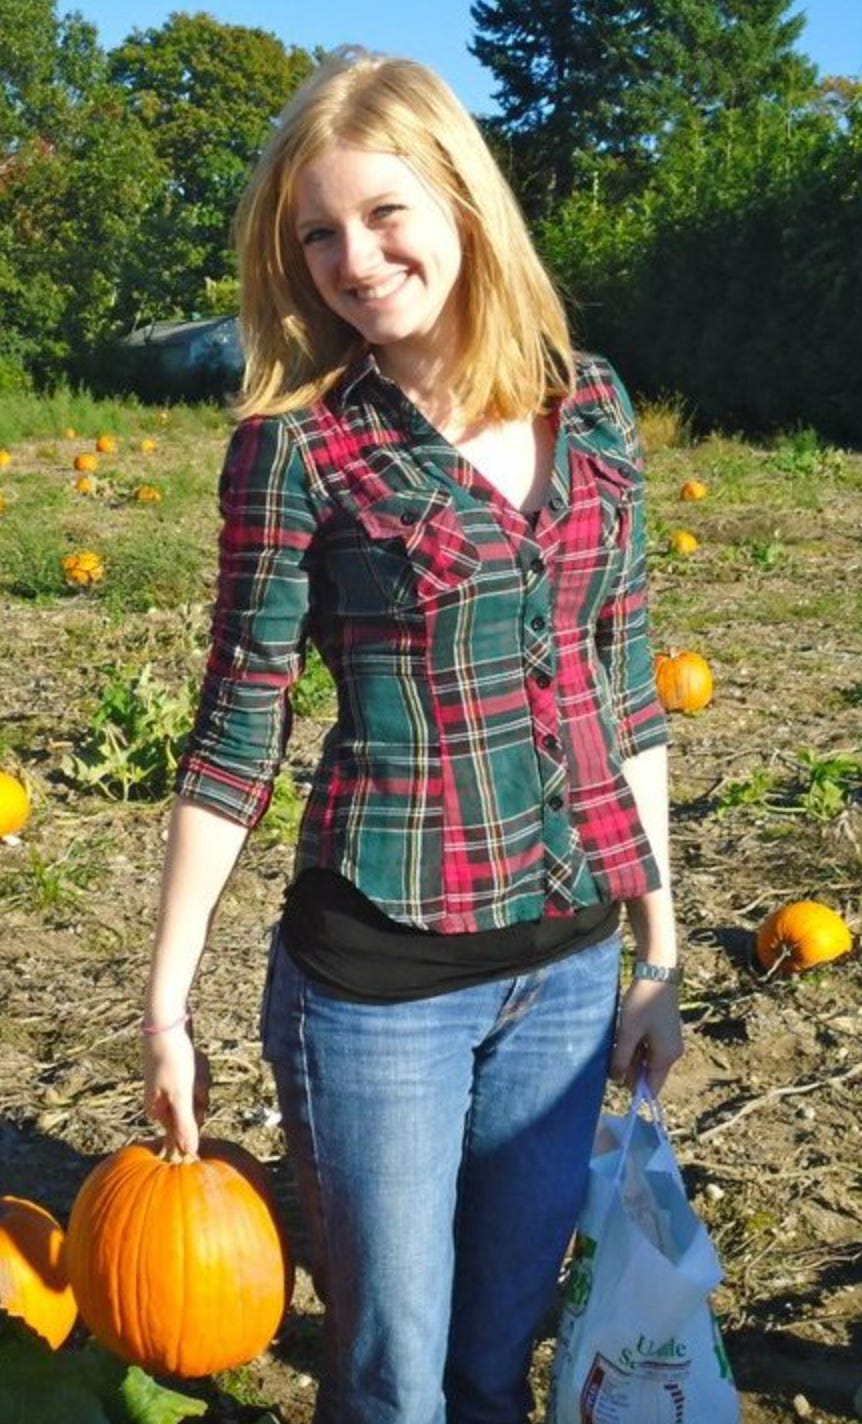 Carly standing in a pumpkin patch, wearing a red and green plaid shirt and holding a pumpkin.